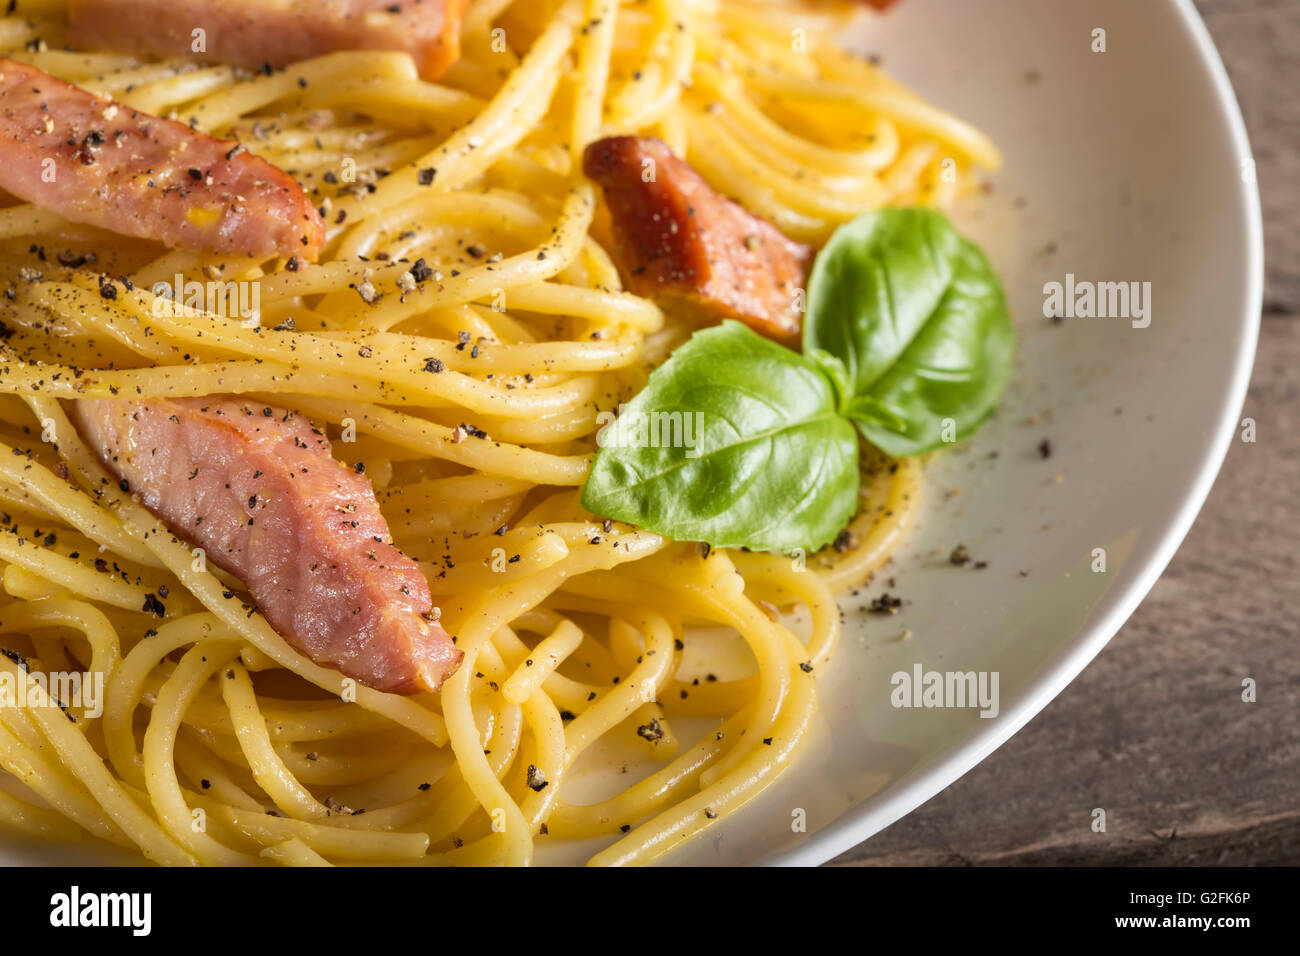 Spaghetti carbonara on white plate on rustic wooden background Stock Photo